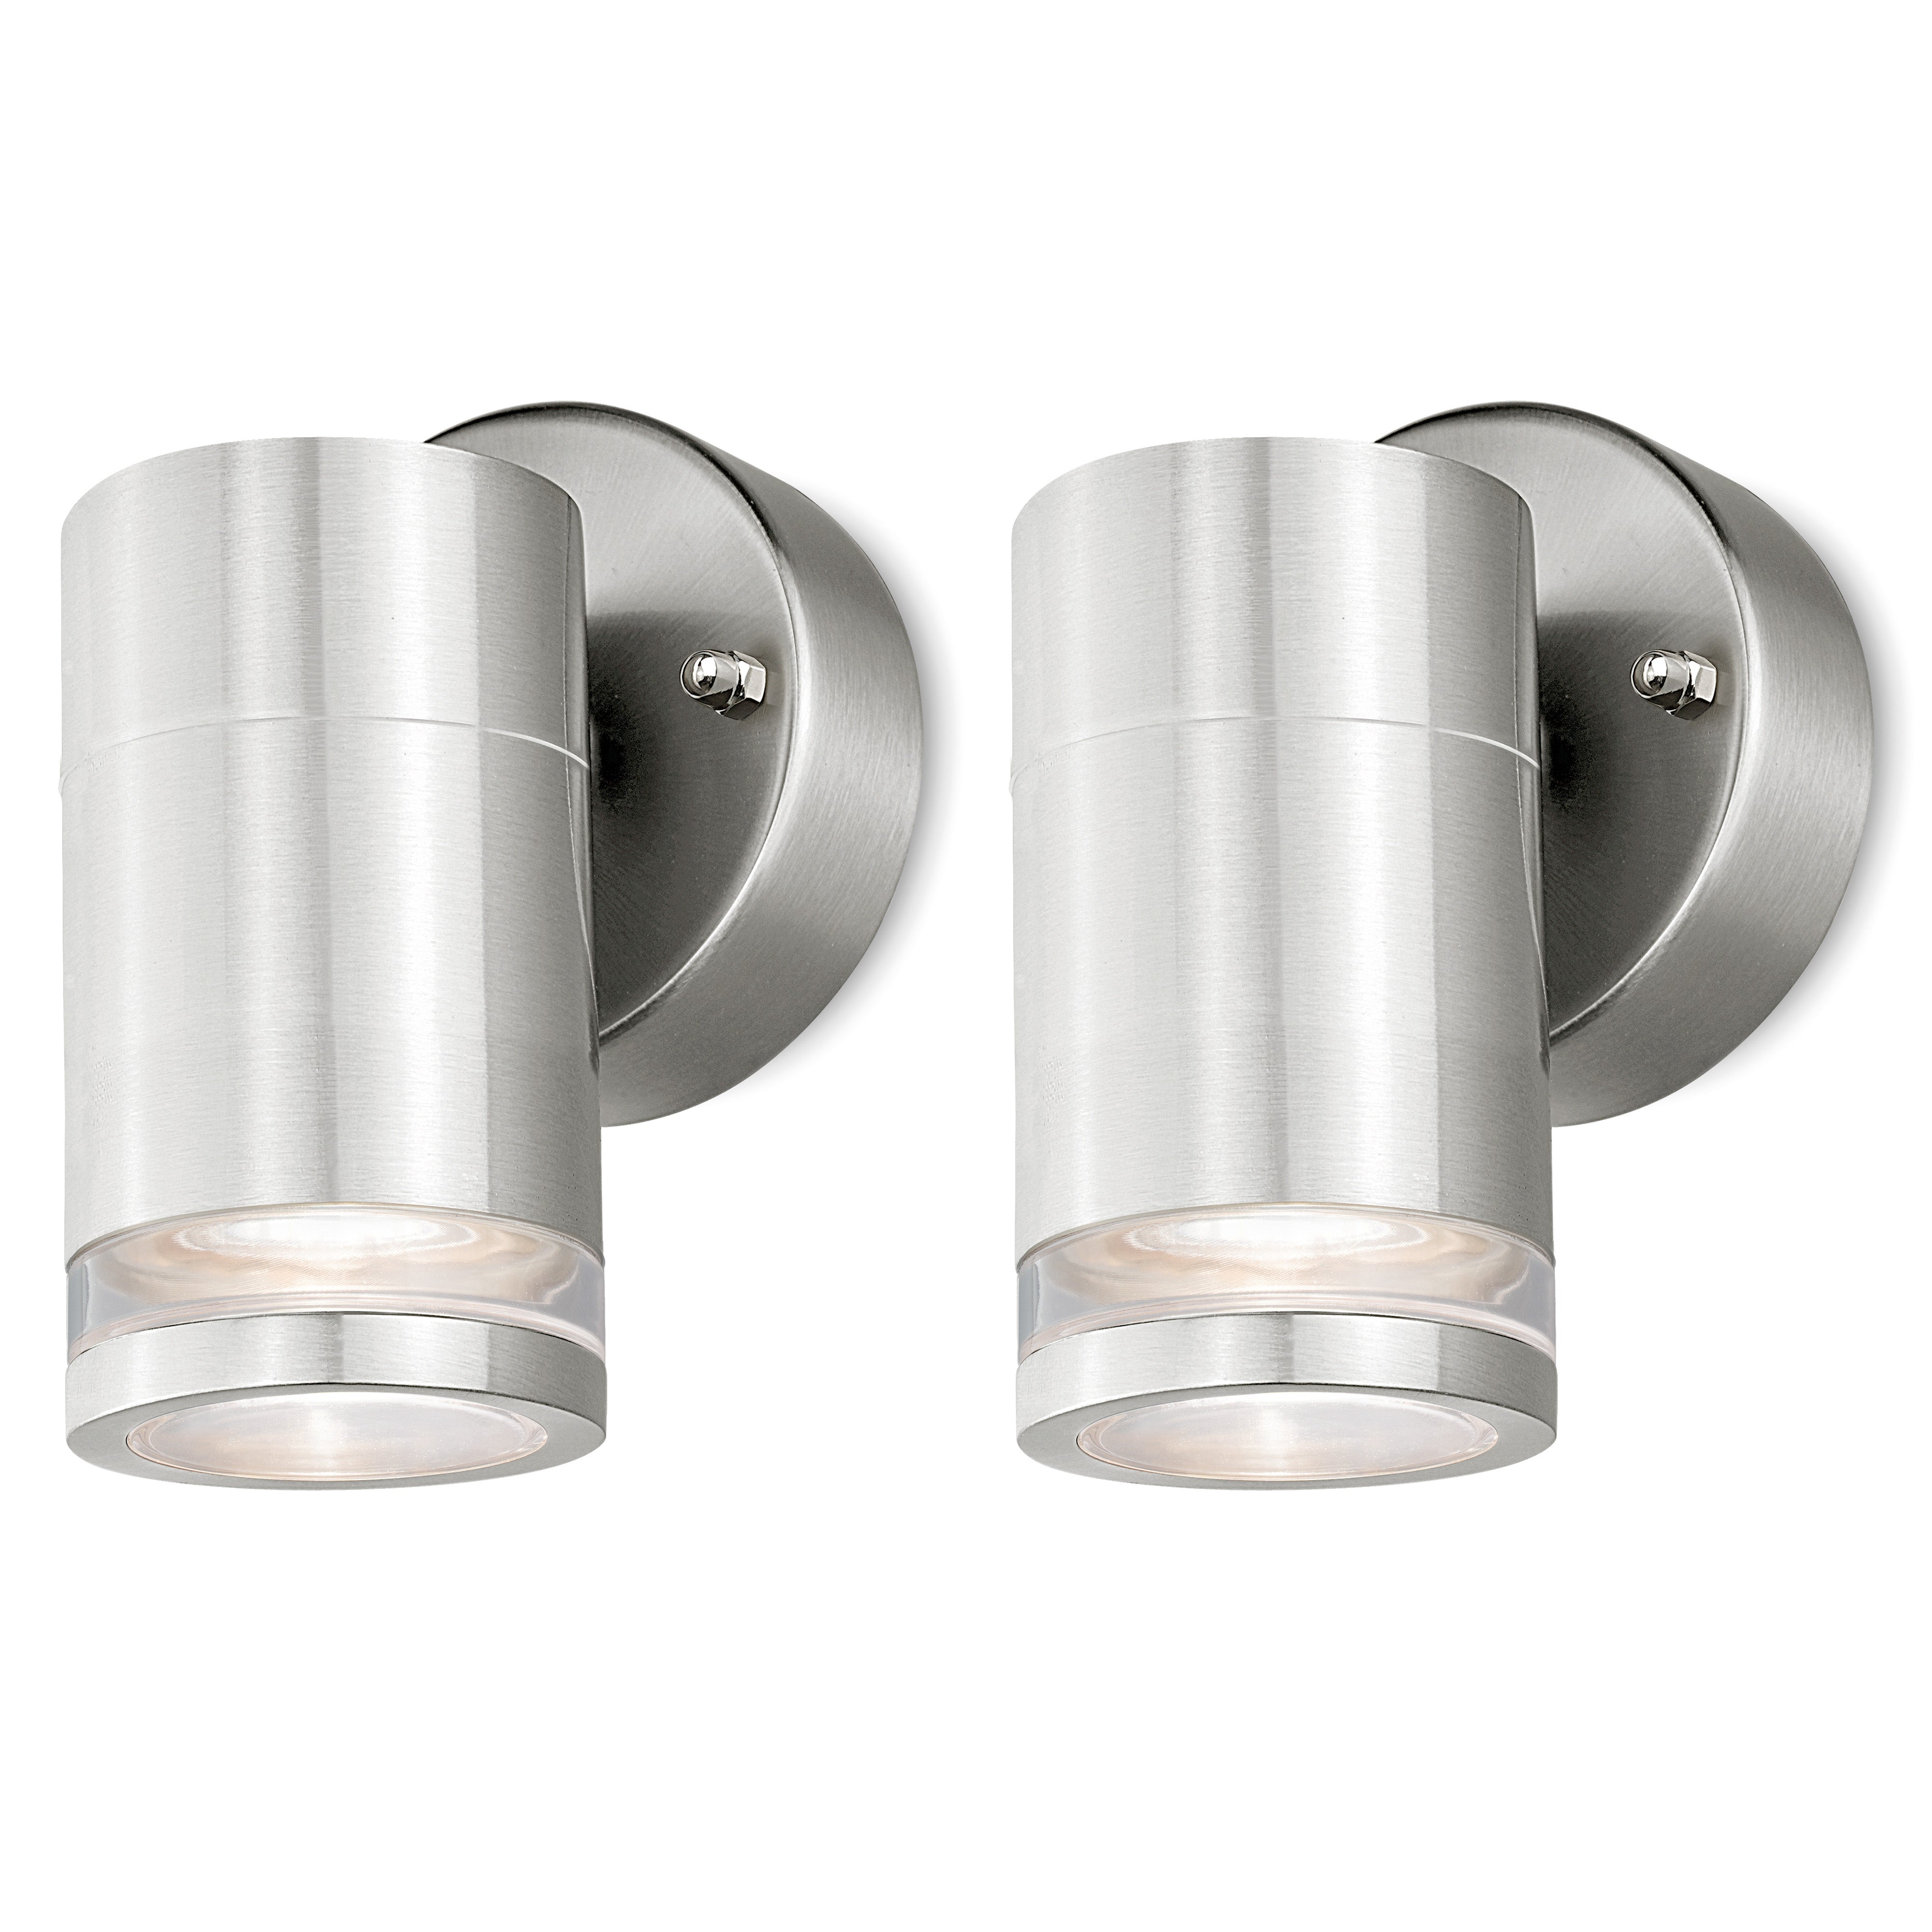 4lite Marinus GU10 Single Direction Outdoor Wall Light without PIR - Stainless Steel (Pack of 2)